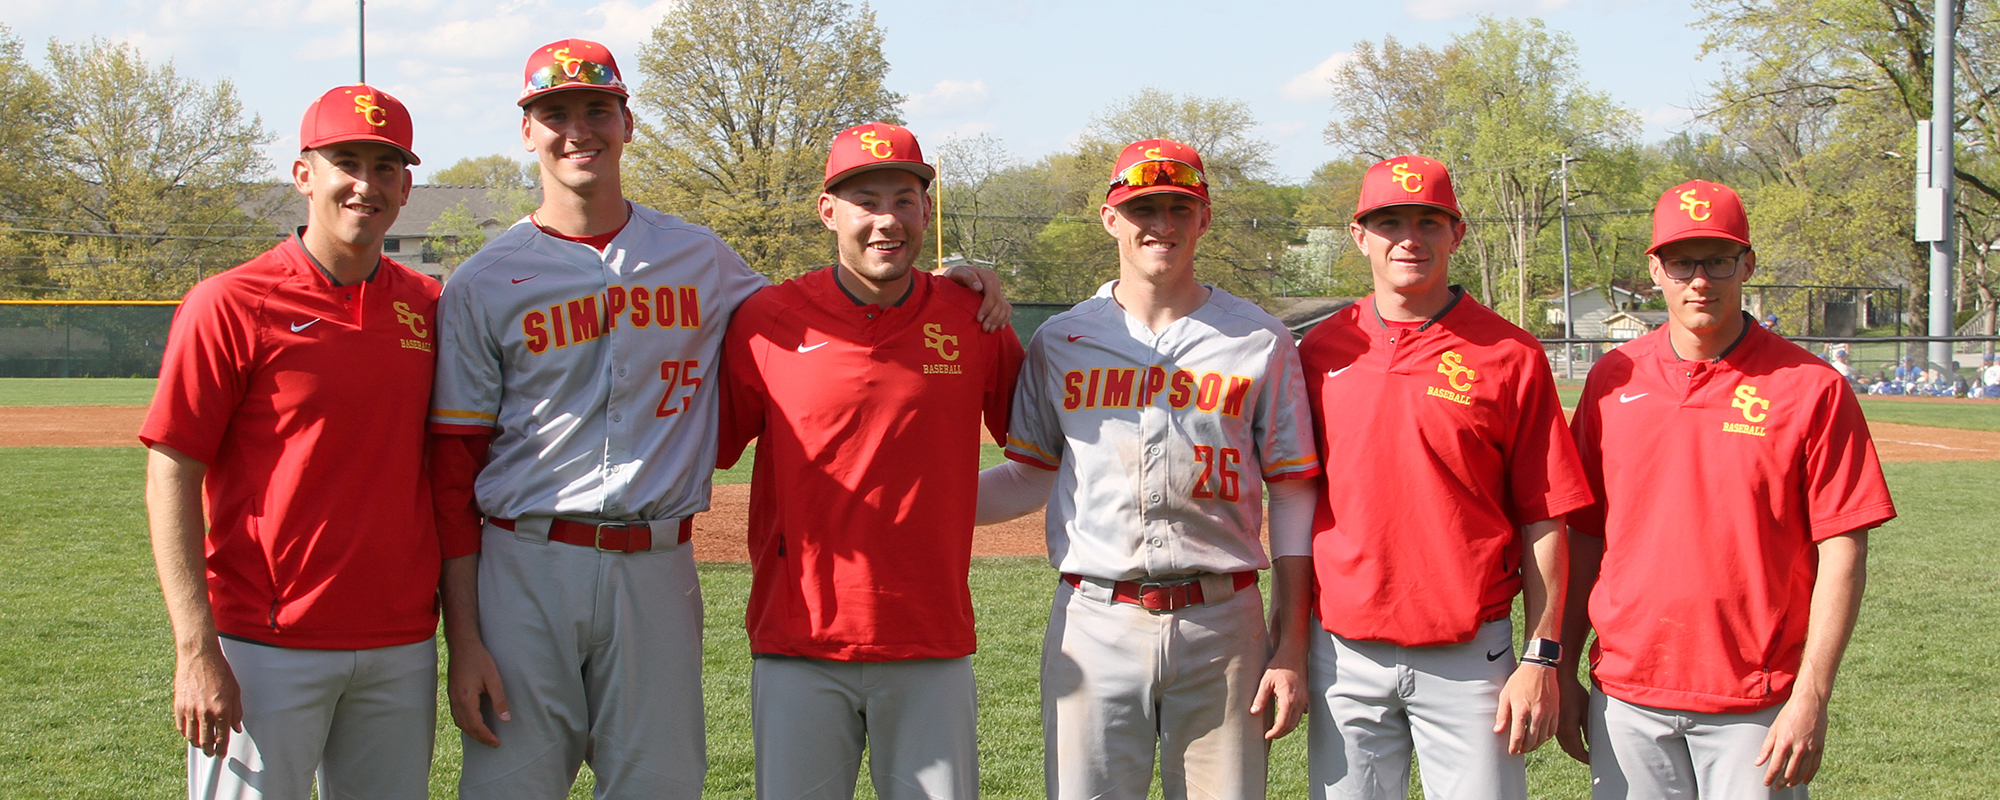 L-R: Head coach Nathan Roling, Devon Veach, Steve Carlson, Nathan Carlin, assistant coaches Ethan Westphal and Trent Dooley